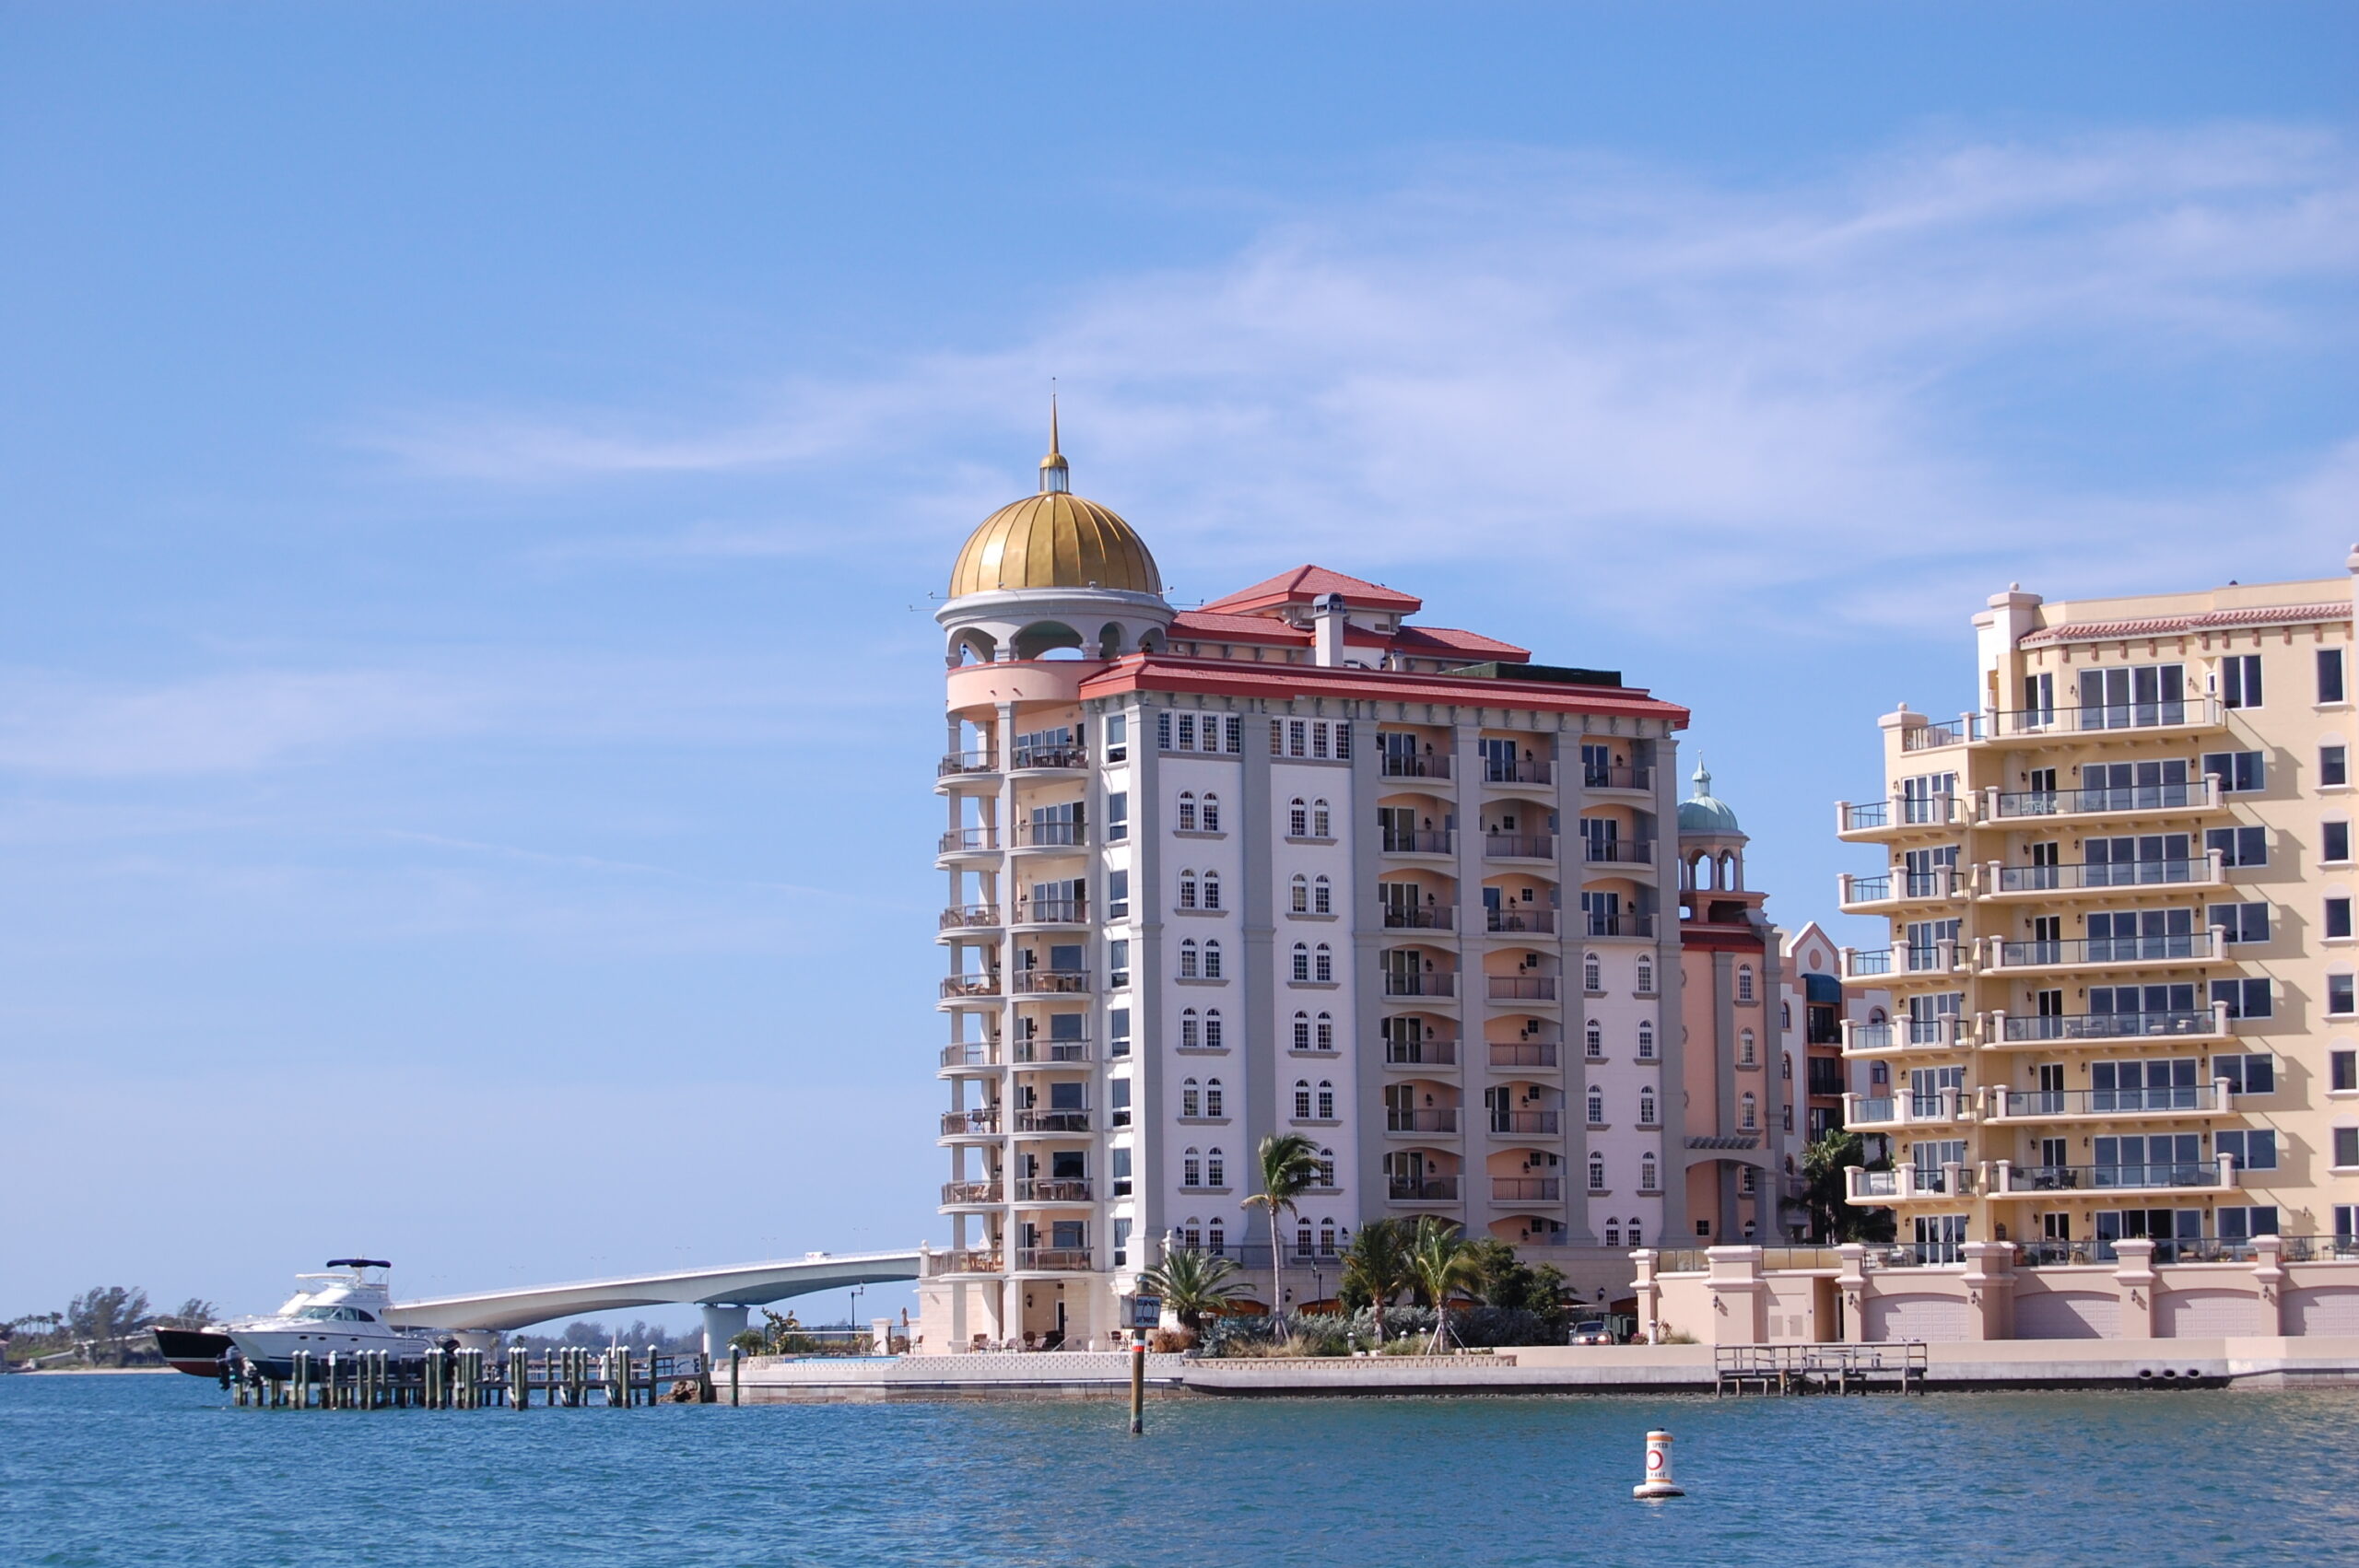 Large investment condominium on Sarasota Bay, Florida, with bridge and boat in background